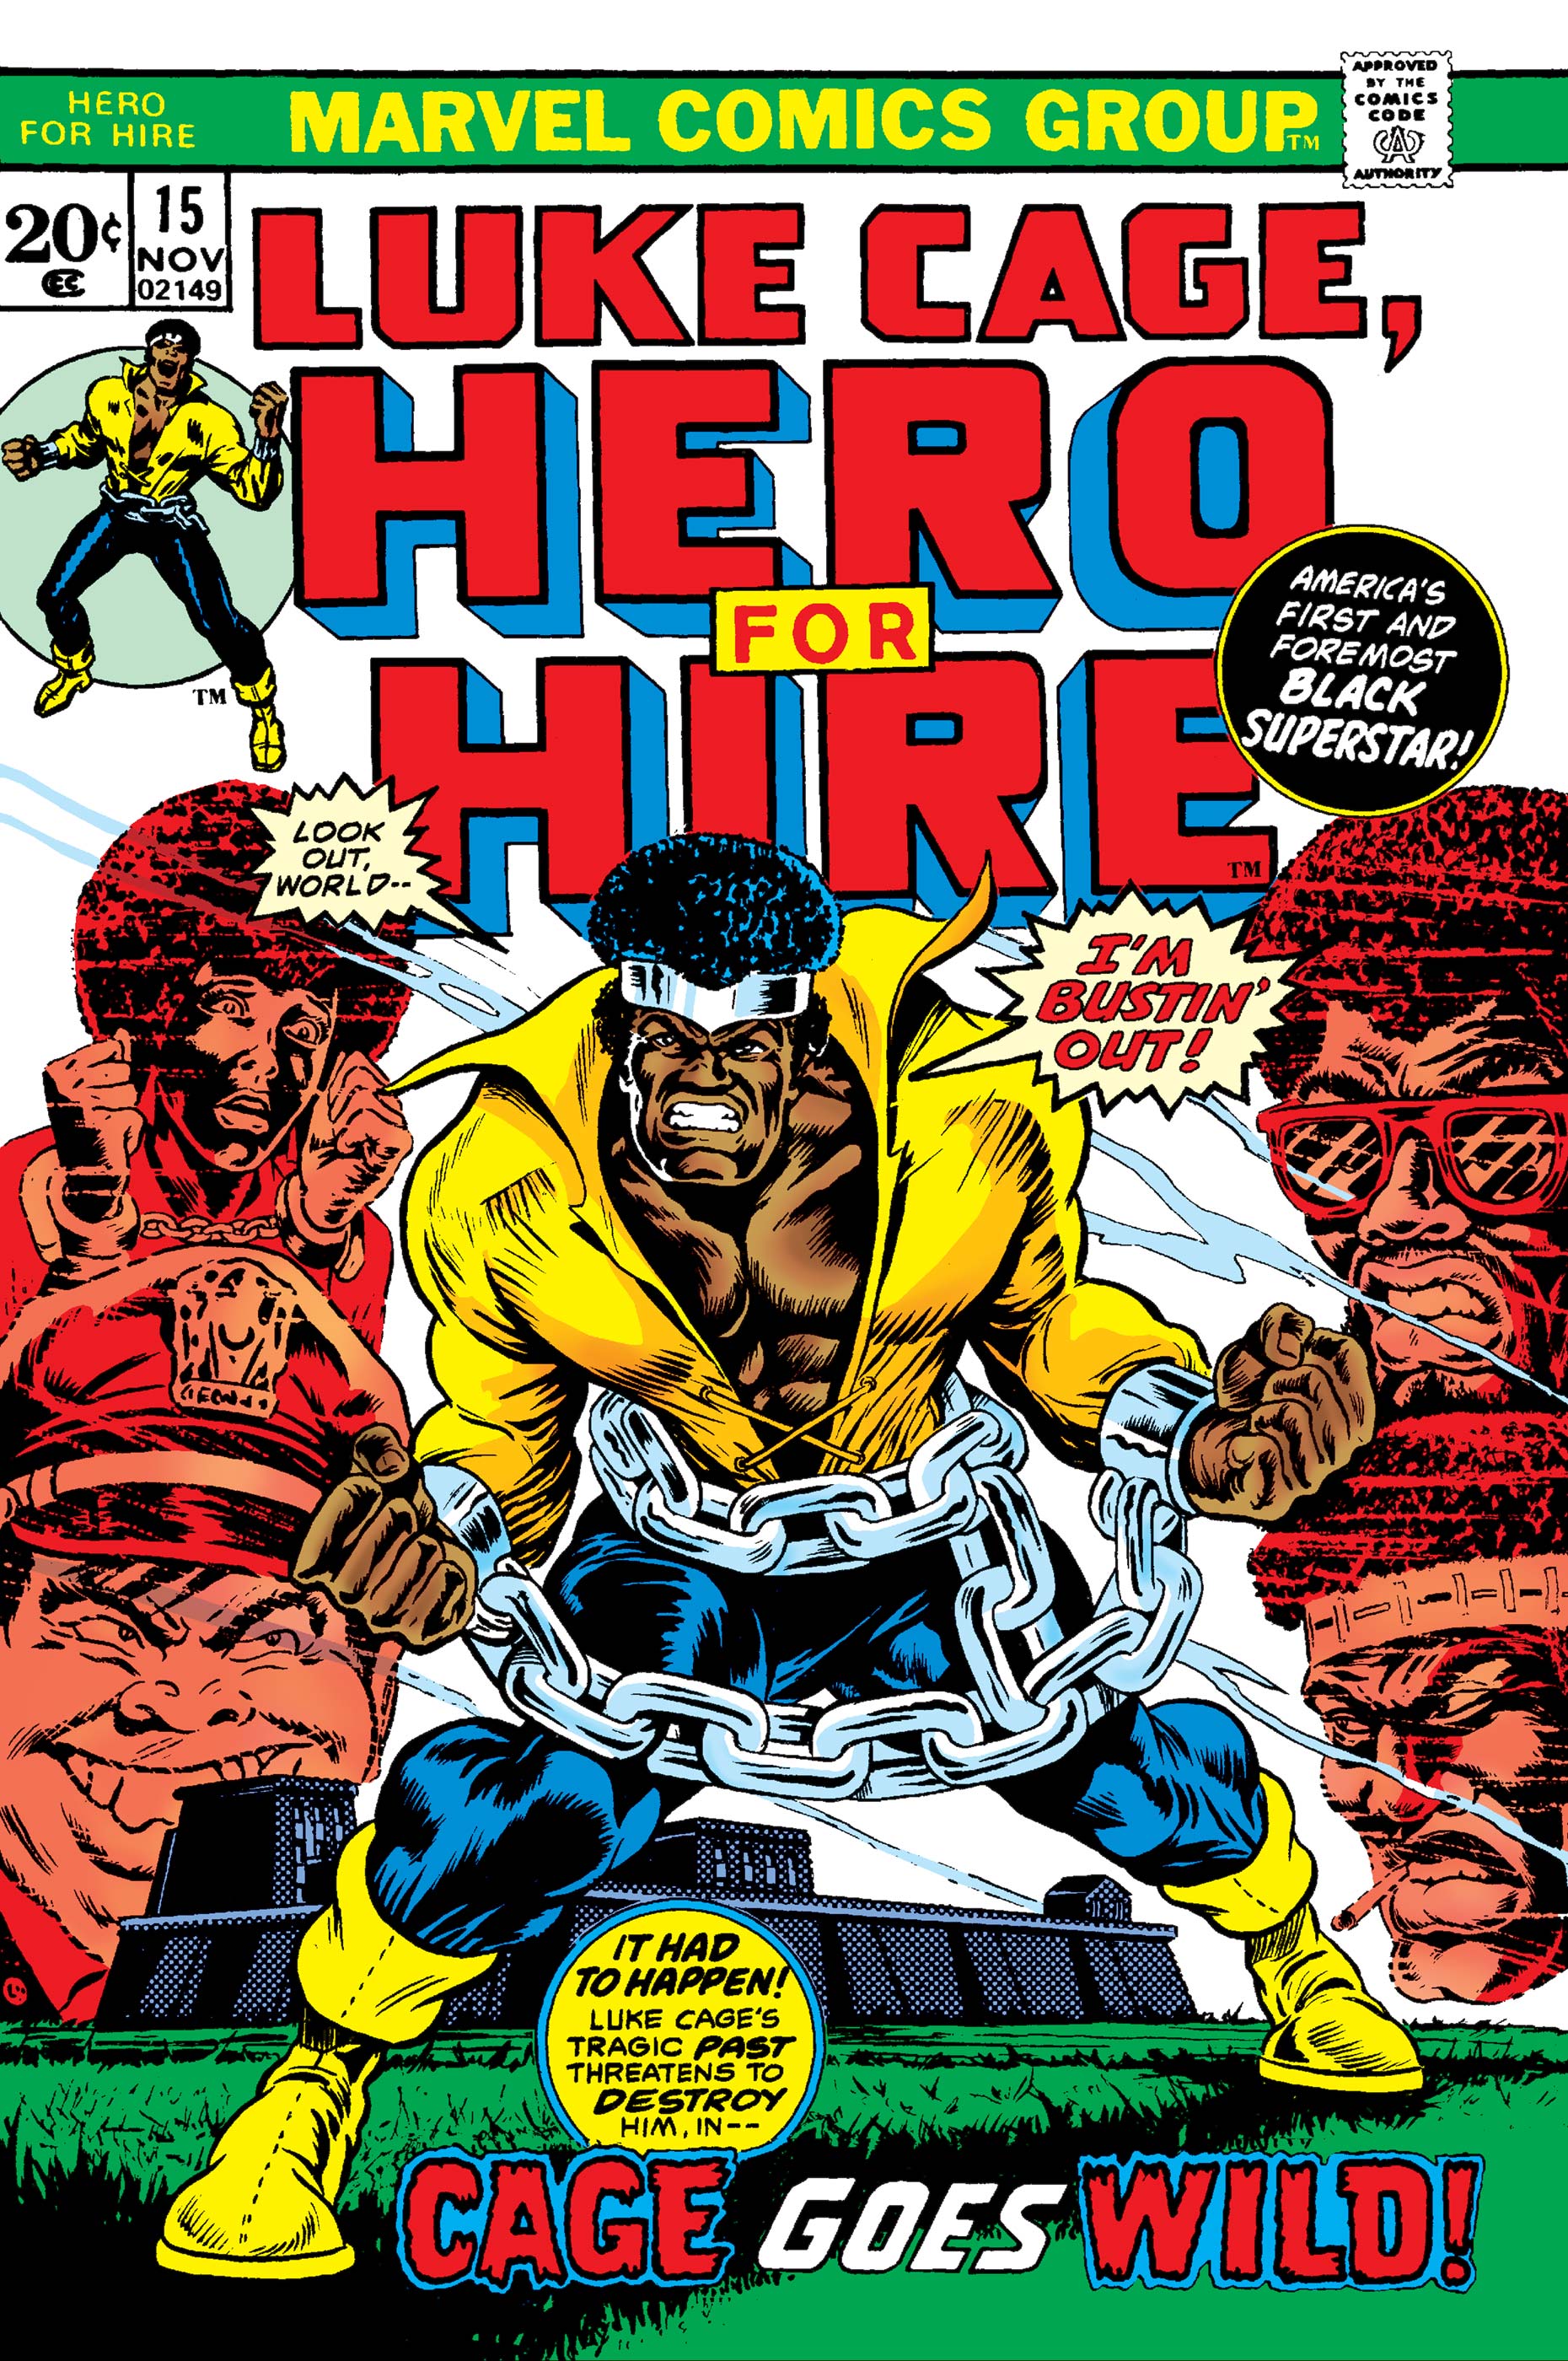 Luke cage hero for hire